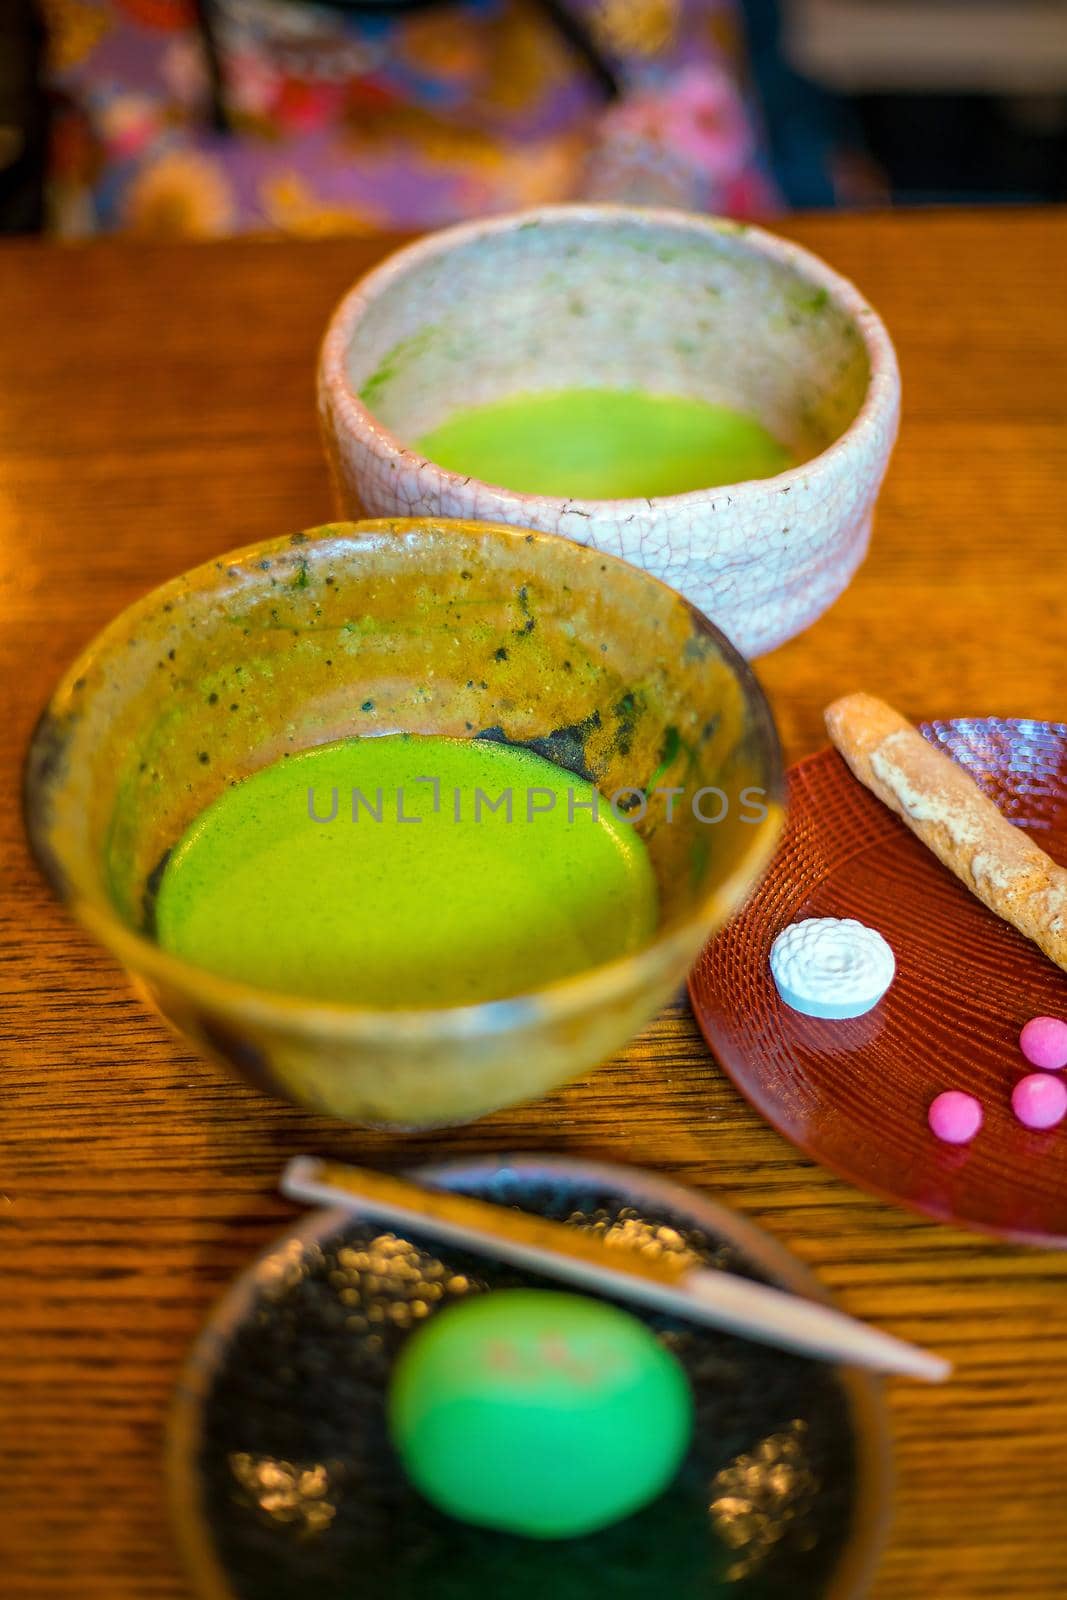 Traditional Kyoto style green tea by f11photo